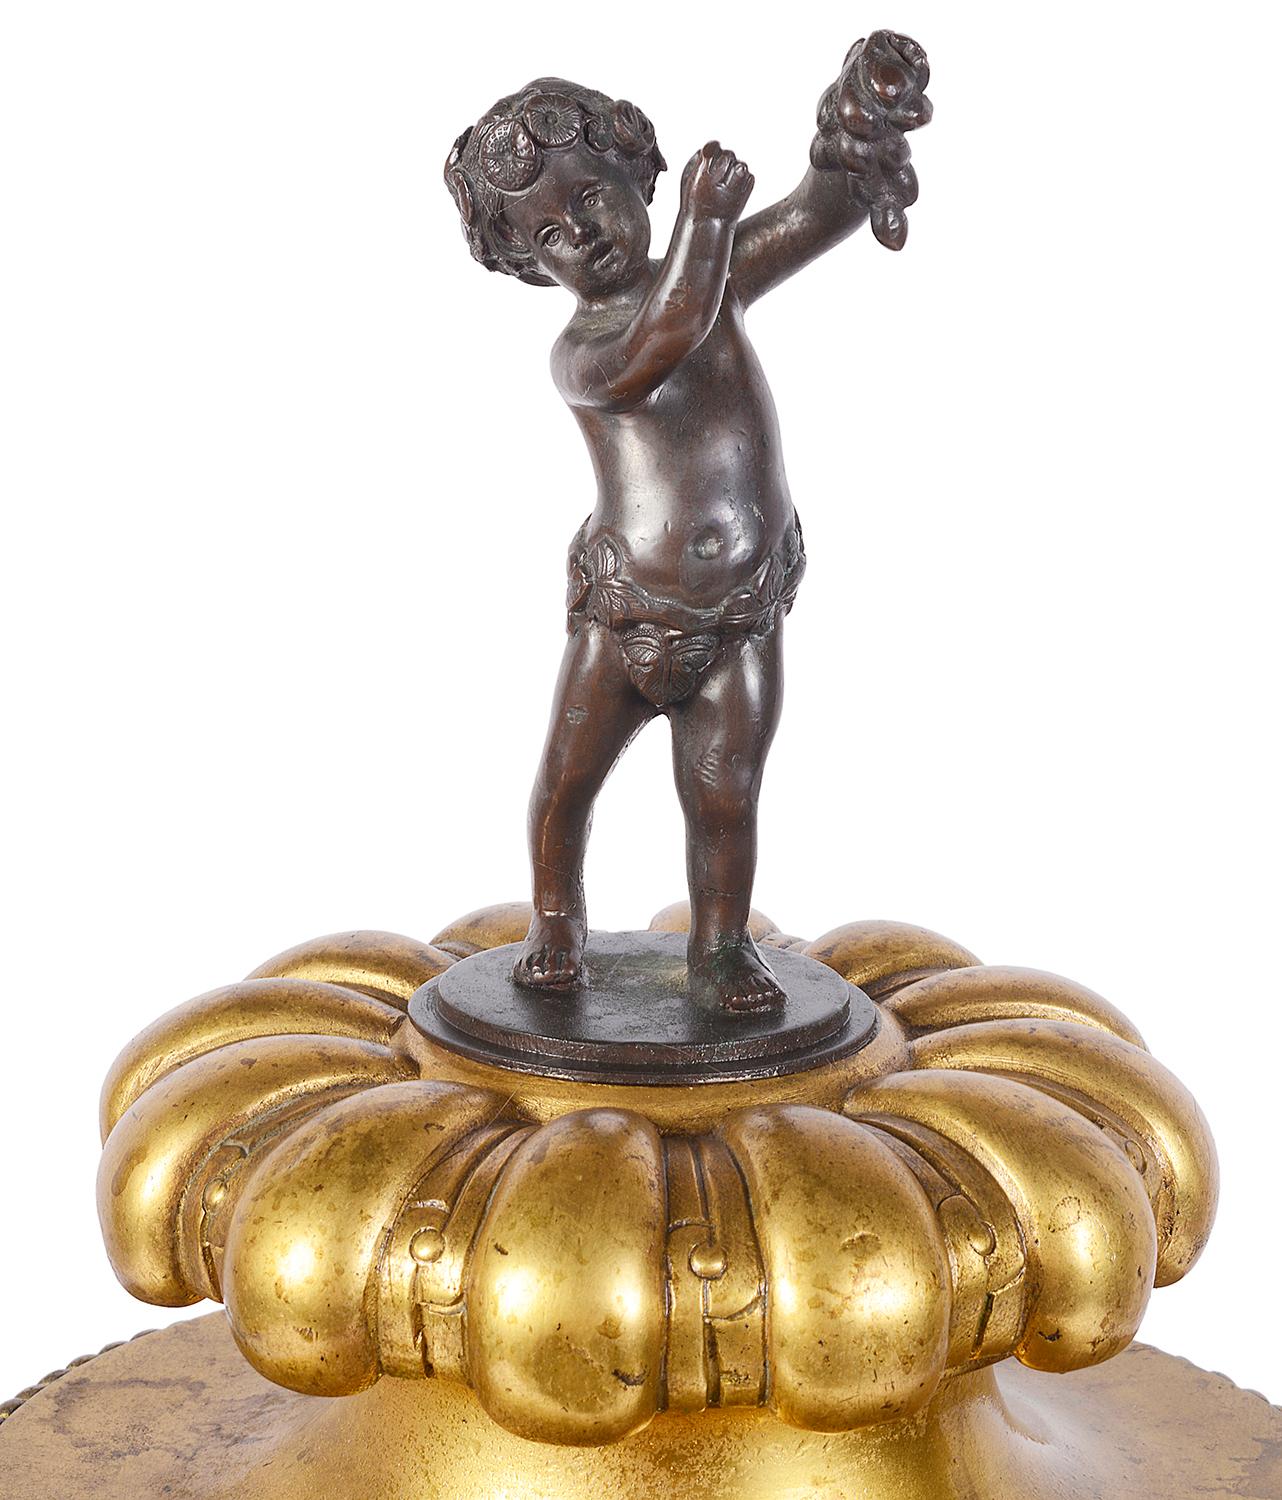 A good quality 19th century Italian gilded ormolu and bronze lidded urn, having a young boy holding fruit as a finial to the lid, foliate and acorn relief decoration, a boars head handle to either side, Greek key pattern and further oak leaf and